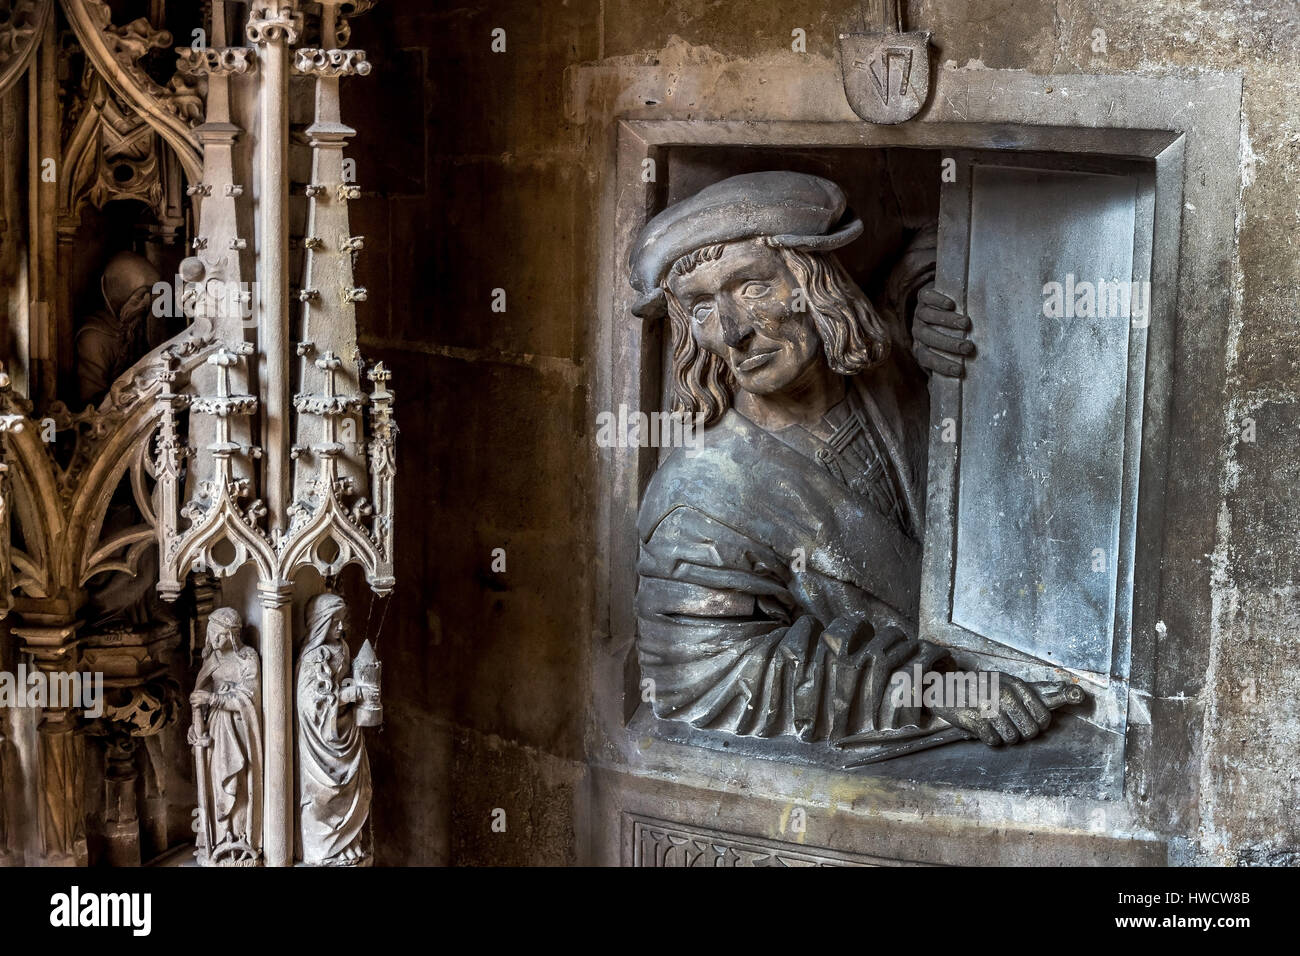 Austria, Vienna, Stephansdom. One of the landmarks of the town. Indoor photograph of the Fensterguckers in the pulpit., Österreich, Wien, Stephansdom. Stock Photo